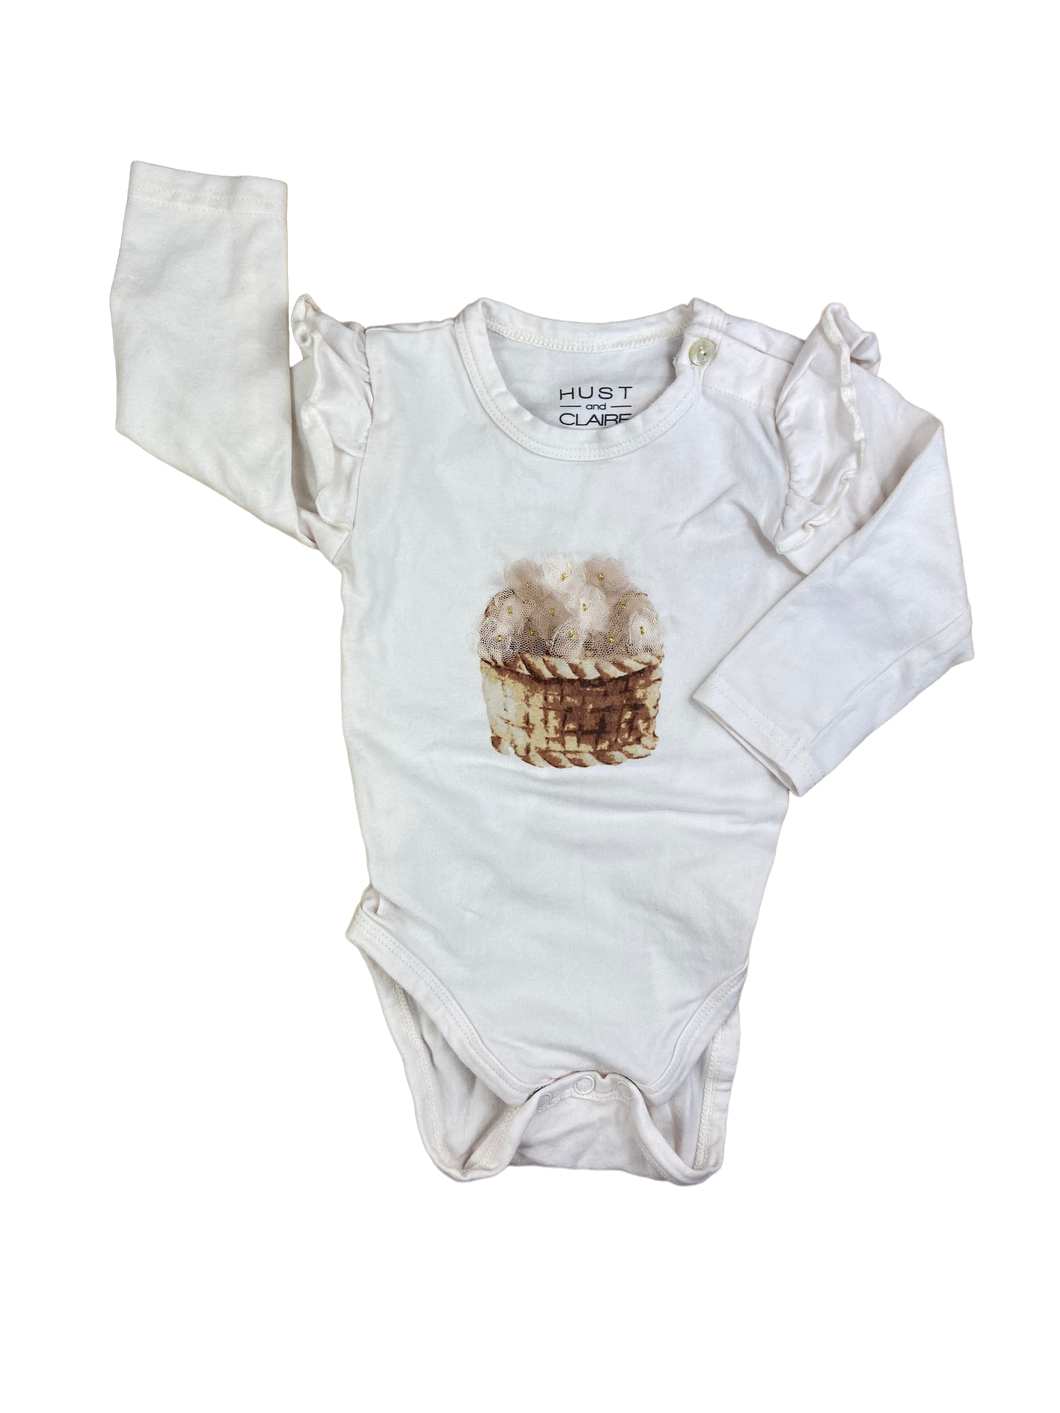 Hust Claire Body Second Hand Kinderkleidung